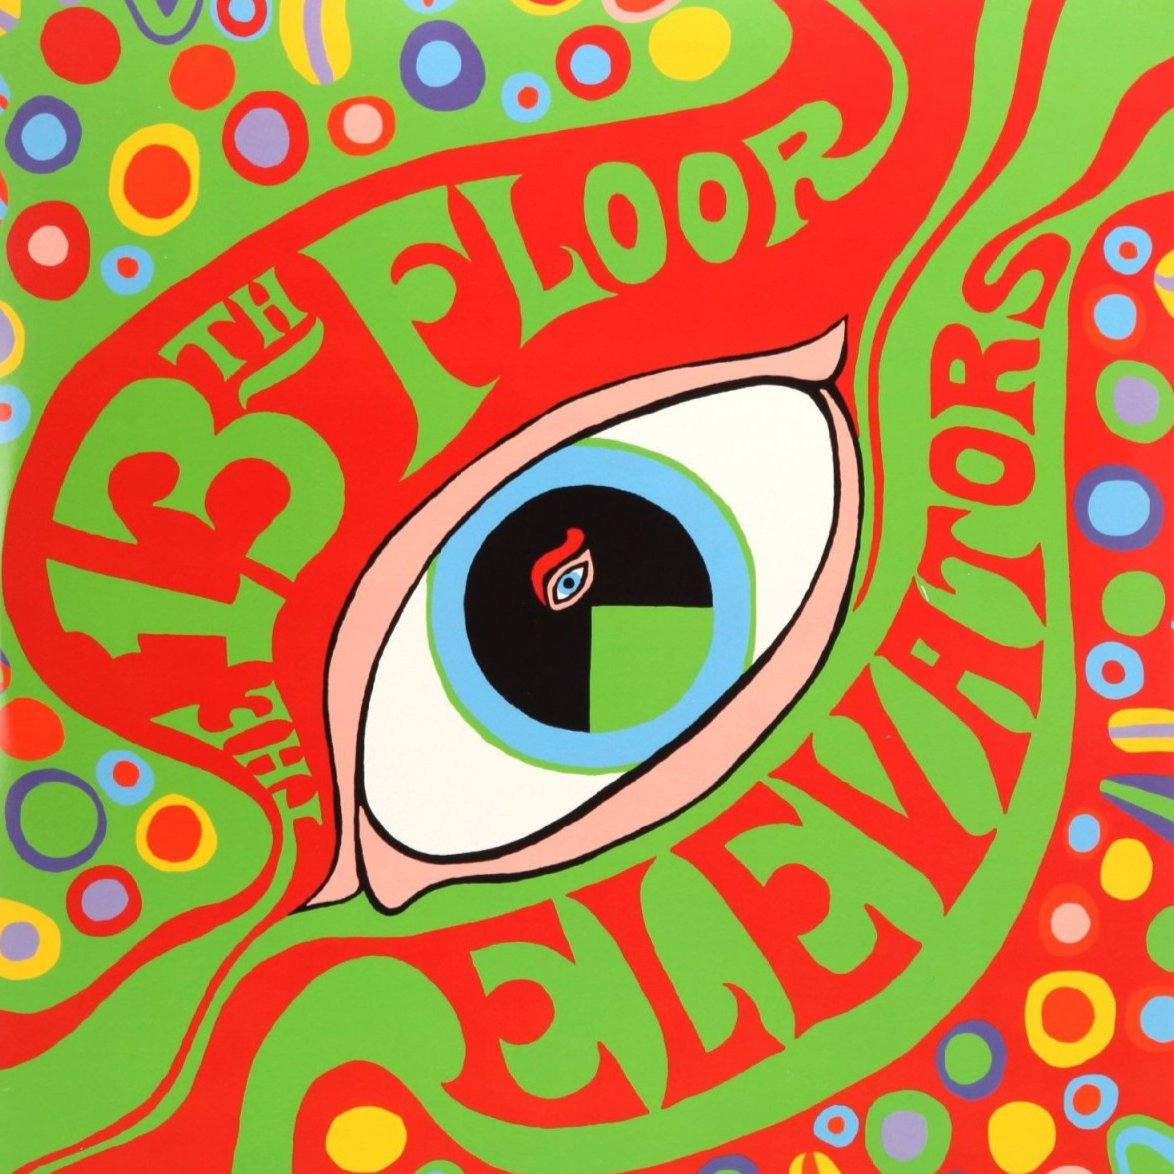 The 13th Floor Elevators - The Psychedelic Sounds Of The 13th Floor Elevators Vinyl